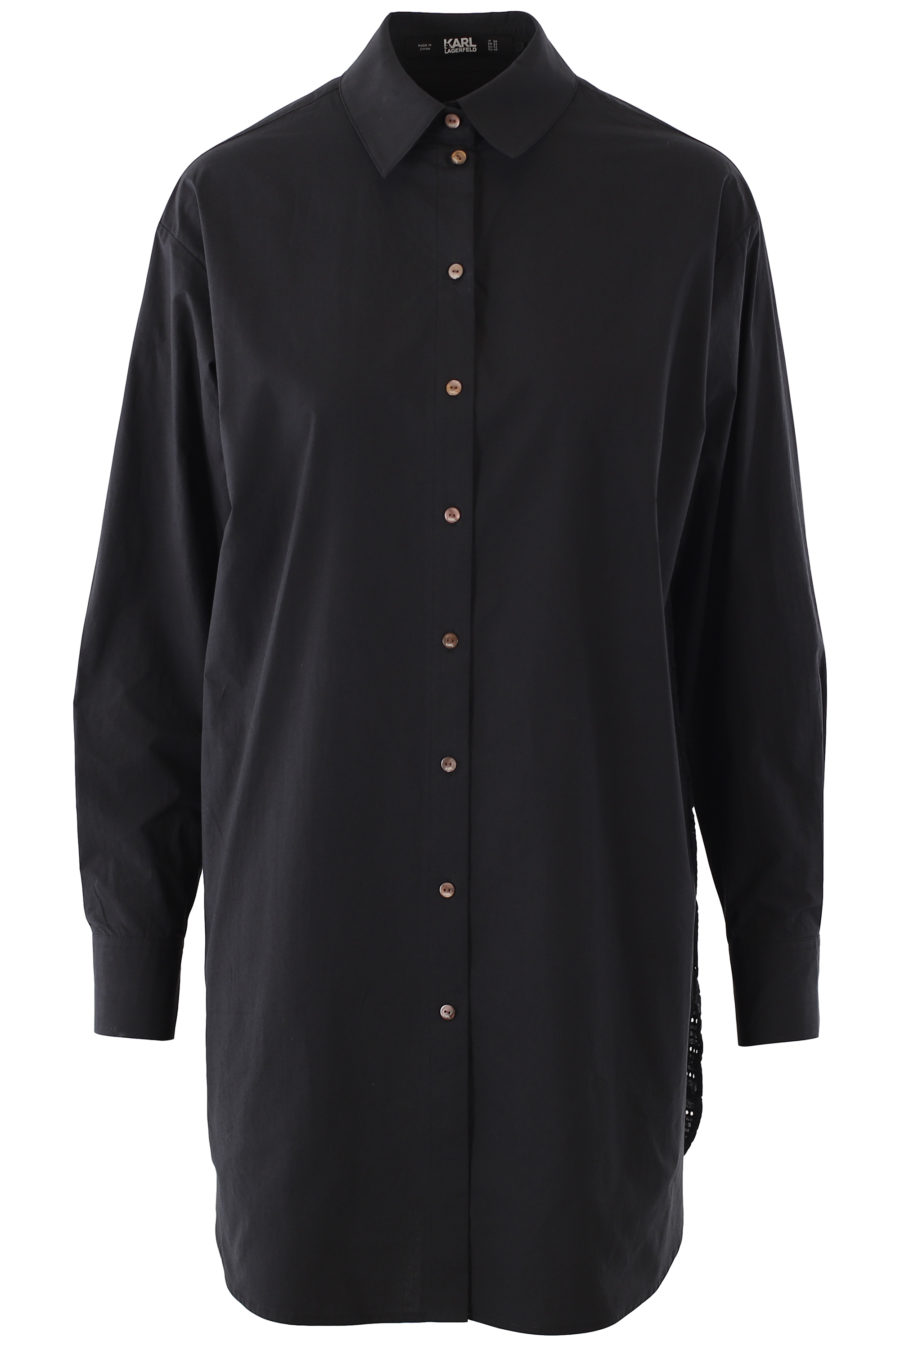 Long black shirt with logo and embroidered details - IMG 1251